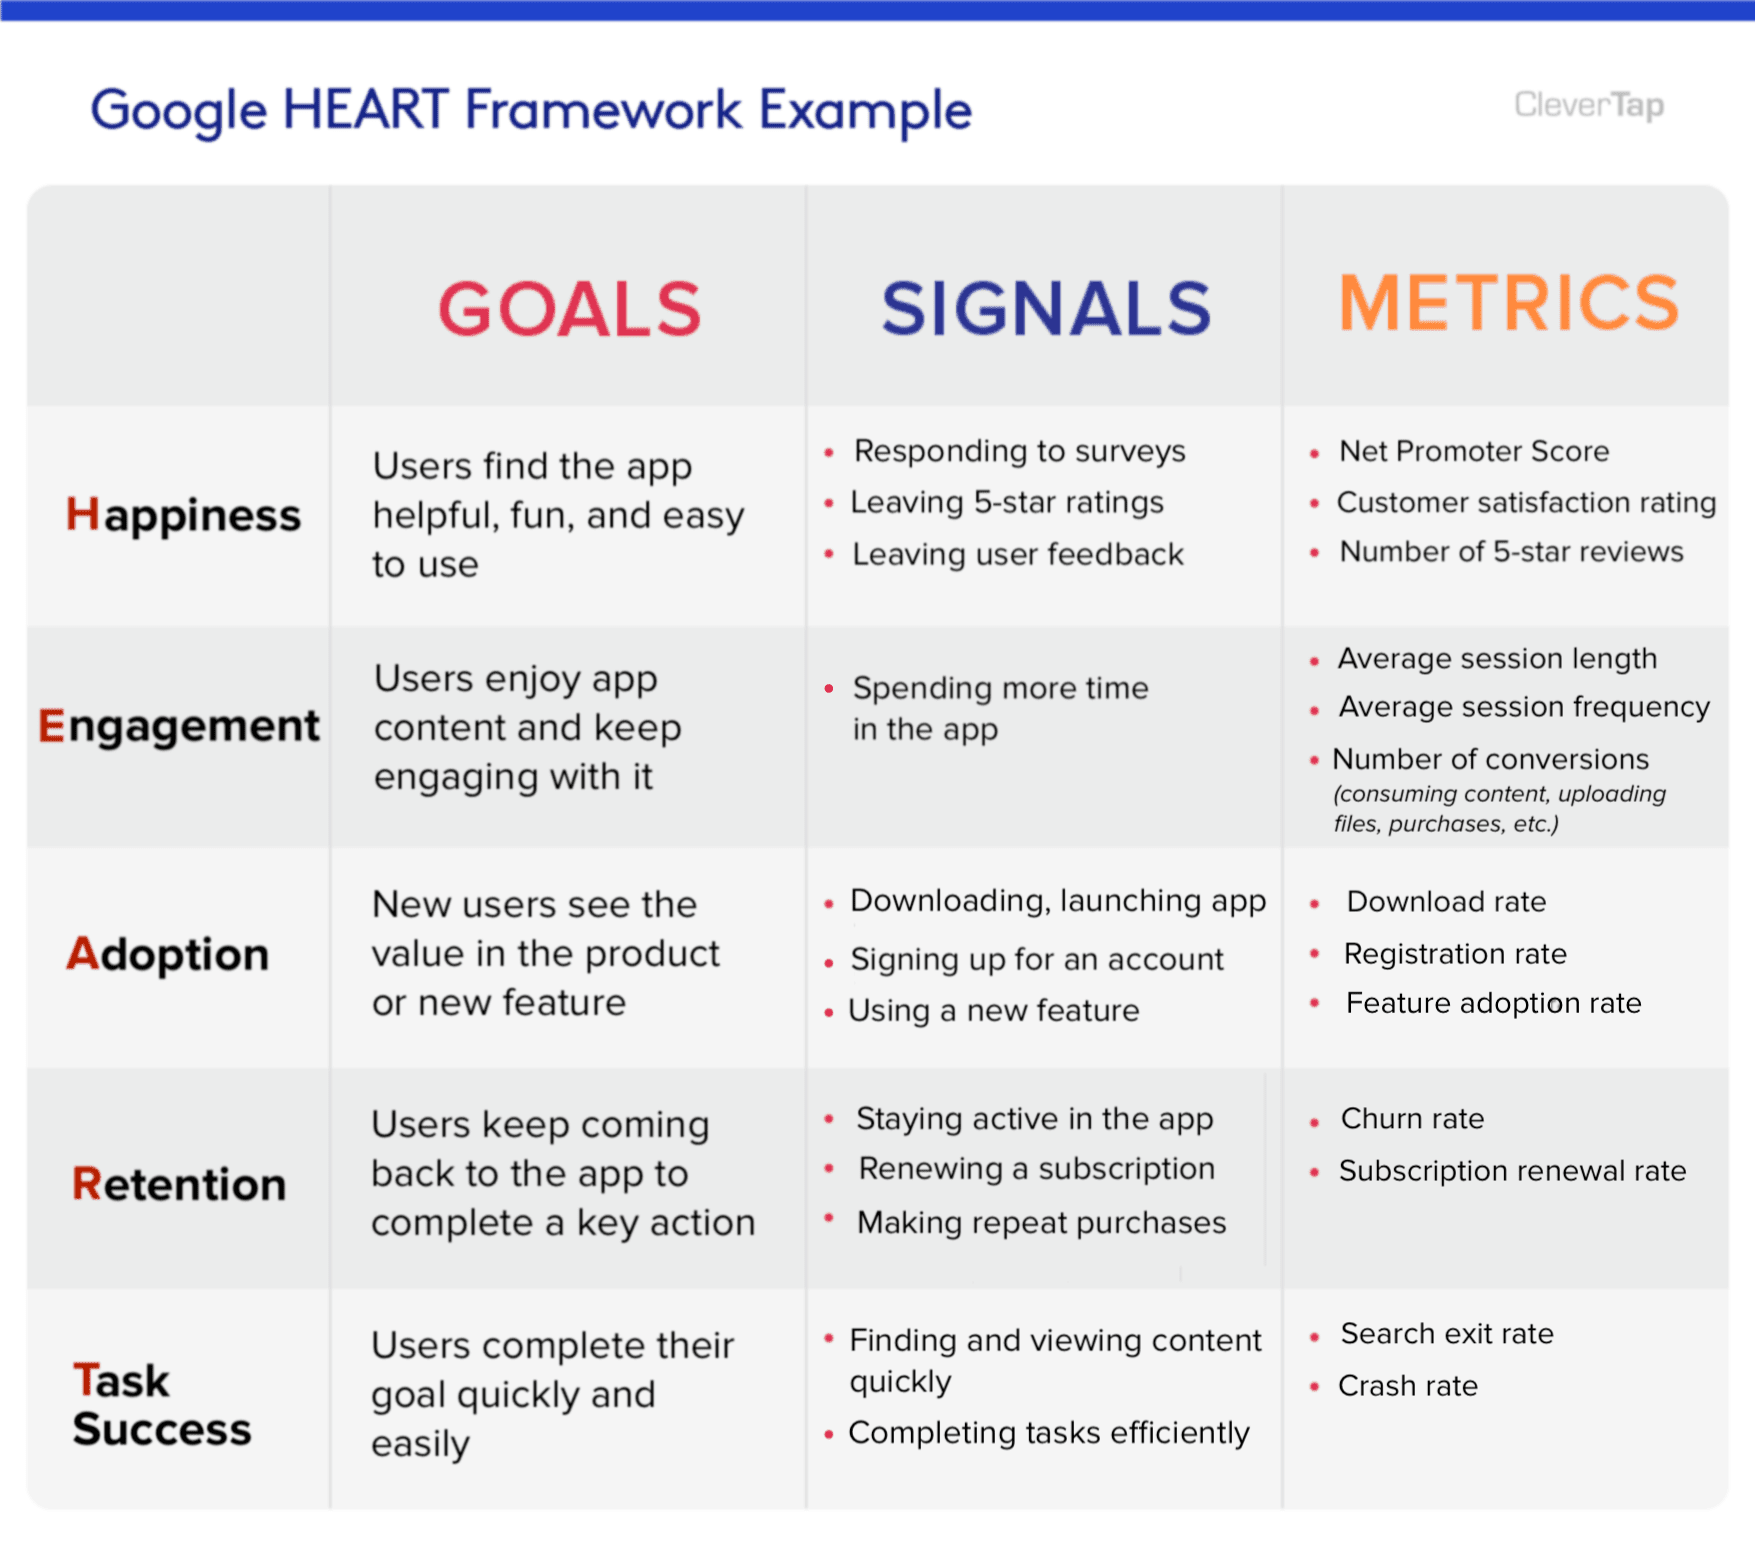 Google's HEART framework is a great way to plan how to measure UX.